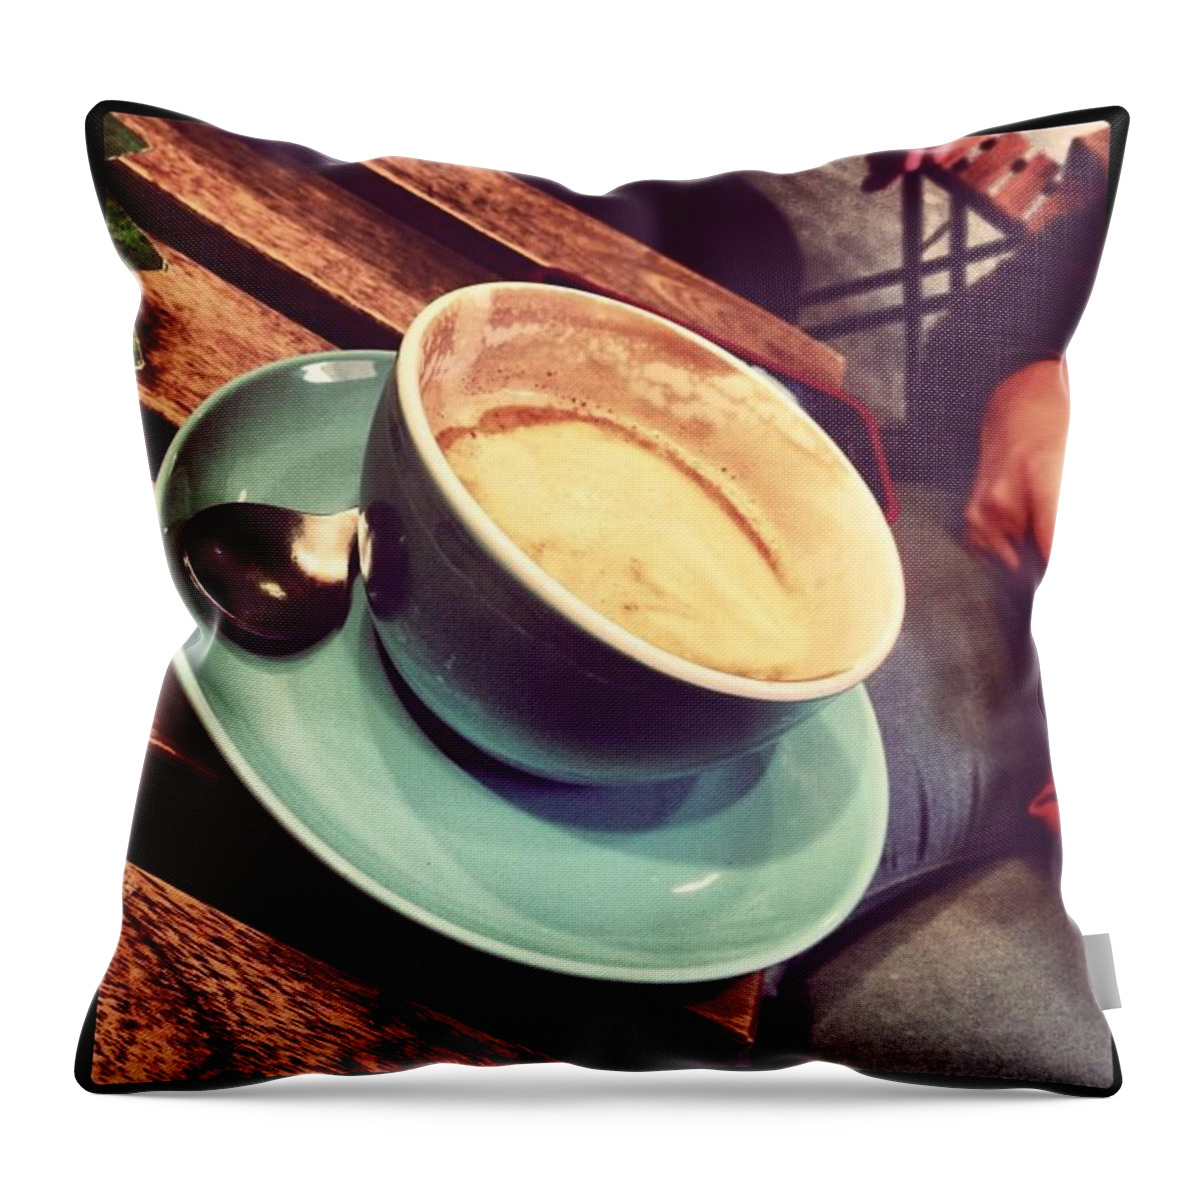  Throw Pillow featuring the photograph All Together Again. Time For A Coffee by Michael Comerford